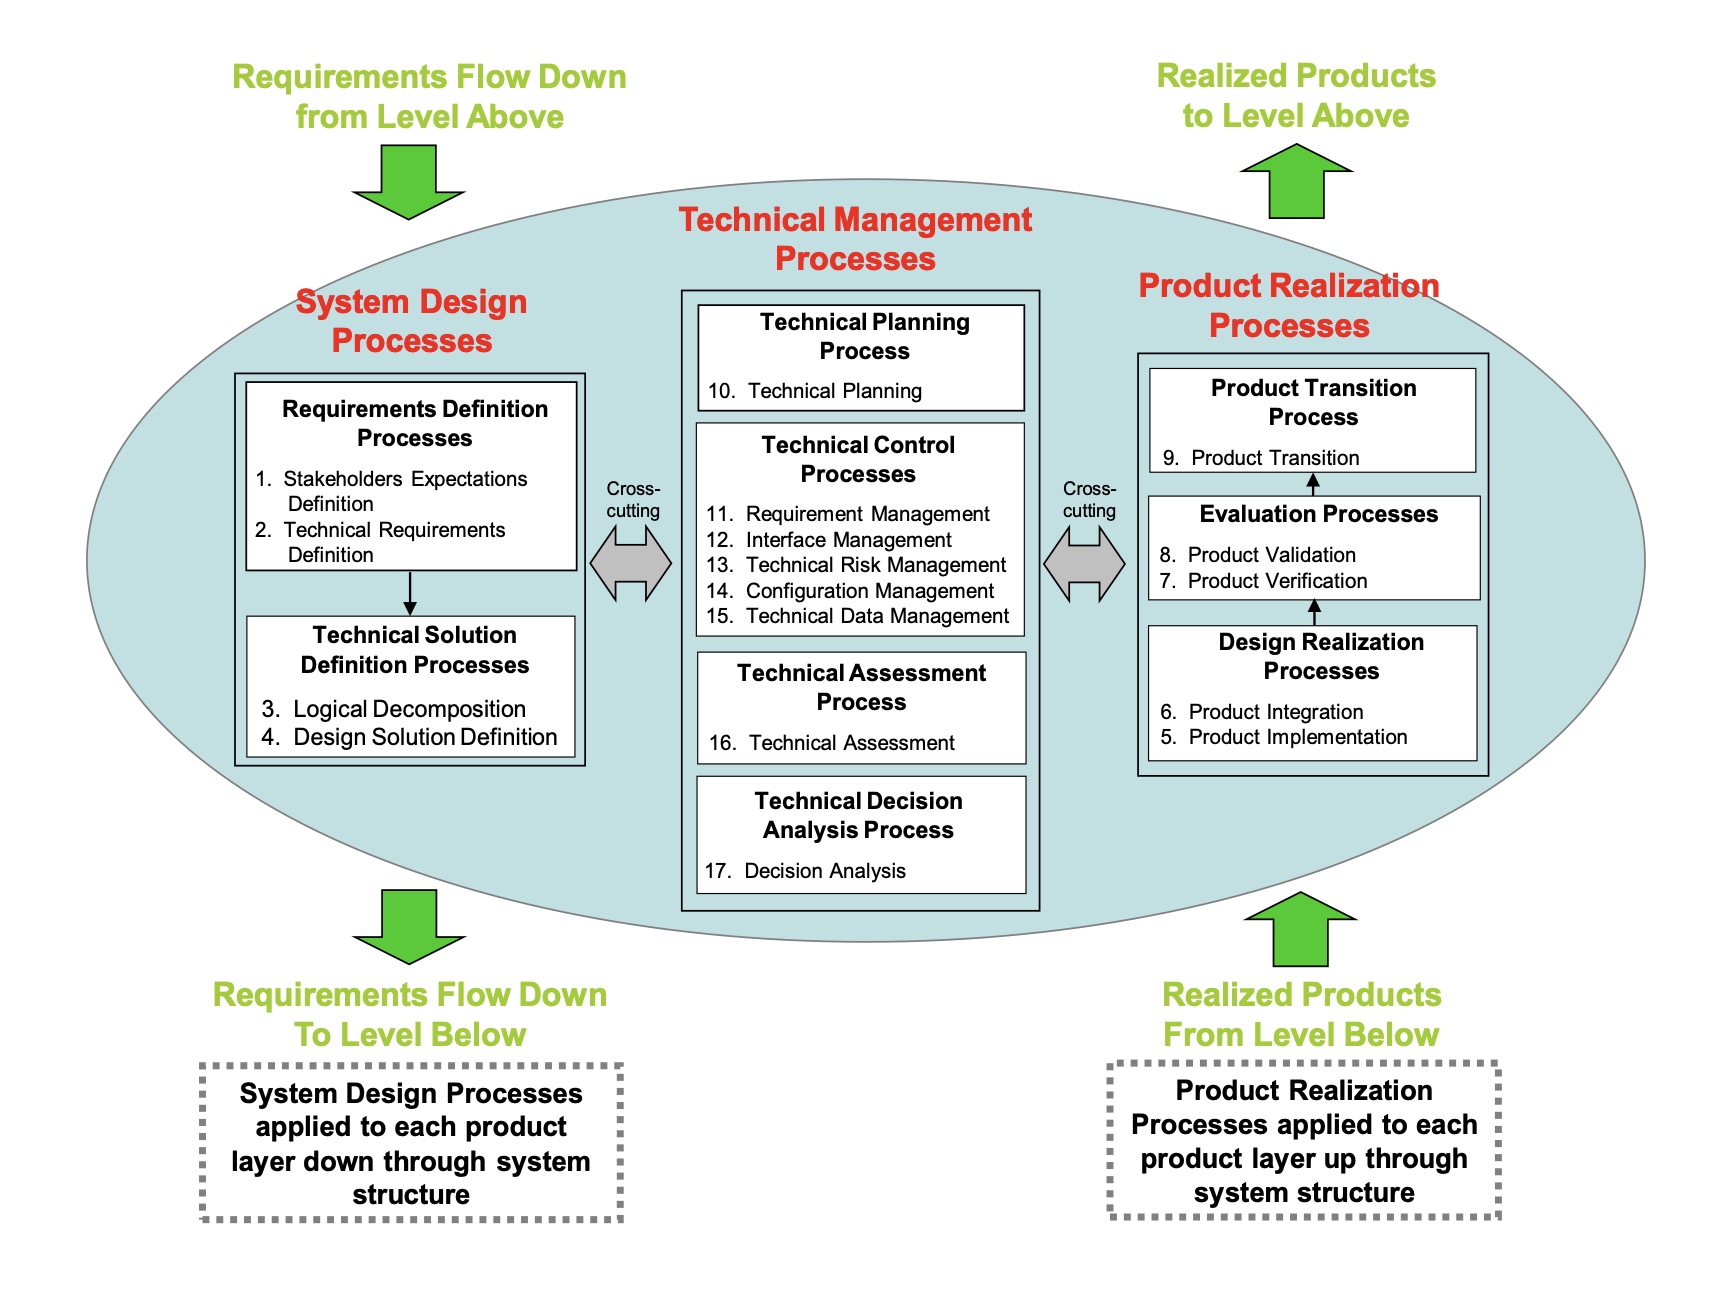 Figure 3 1 - Systems Engineering (SE) Engine. This image shows the 17 common technical processes are enumerated according to their description in this chapter and their interactions.